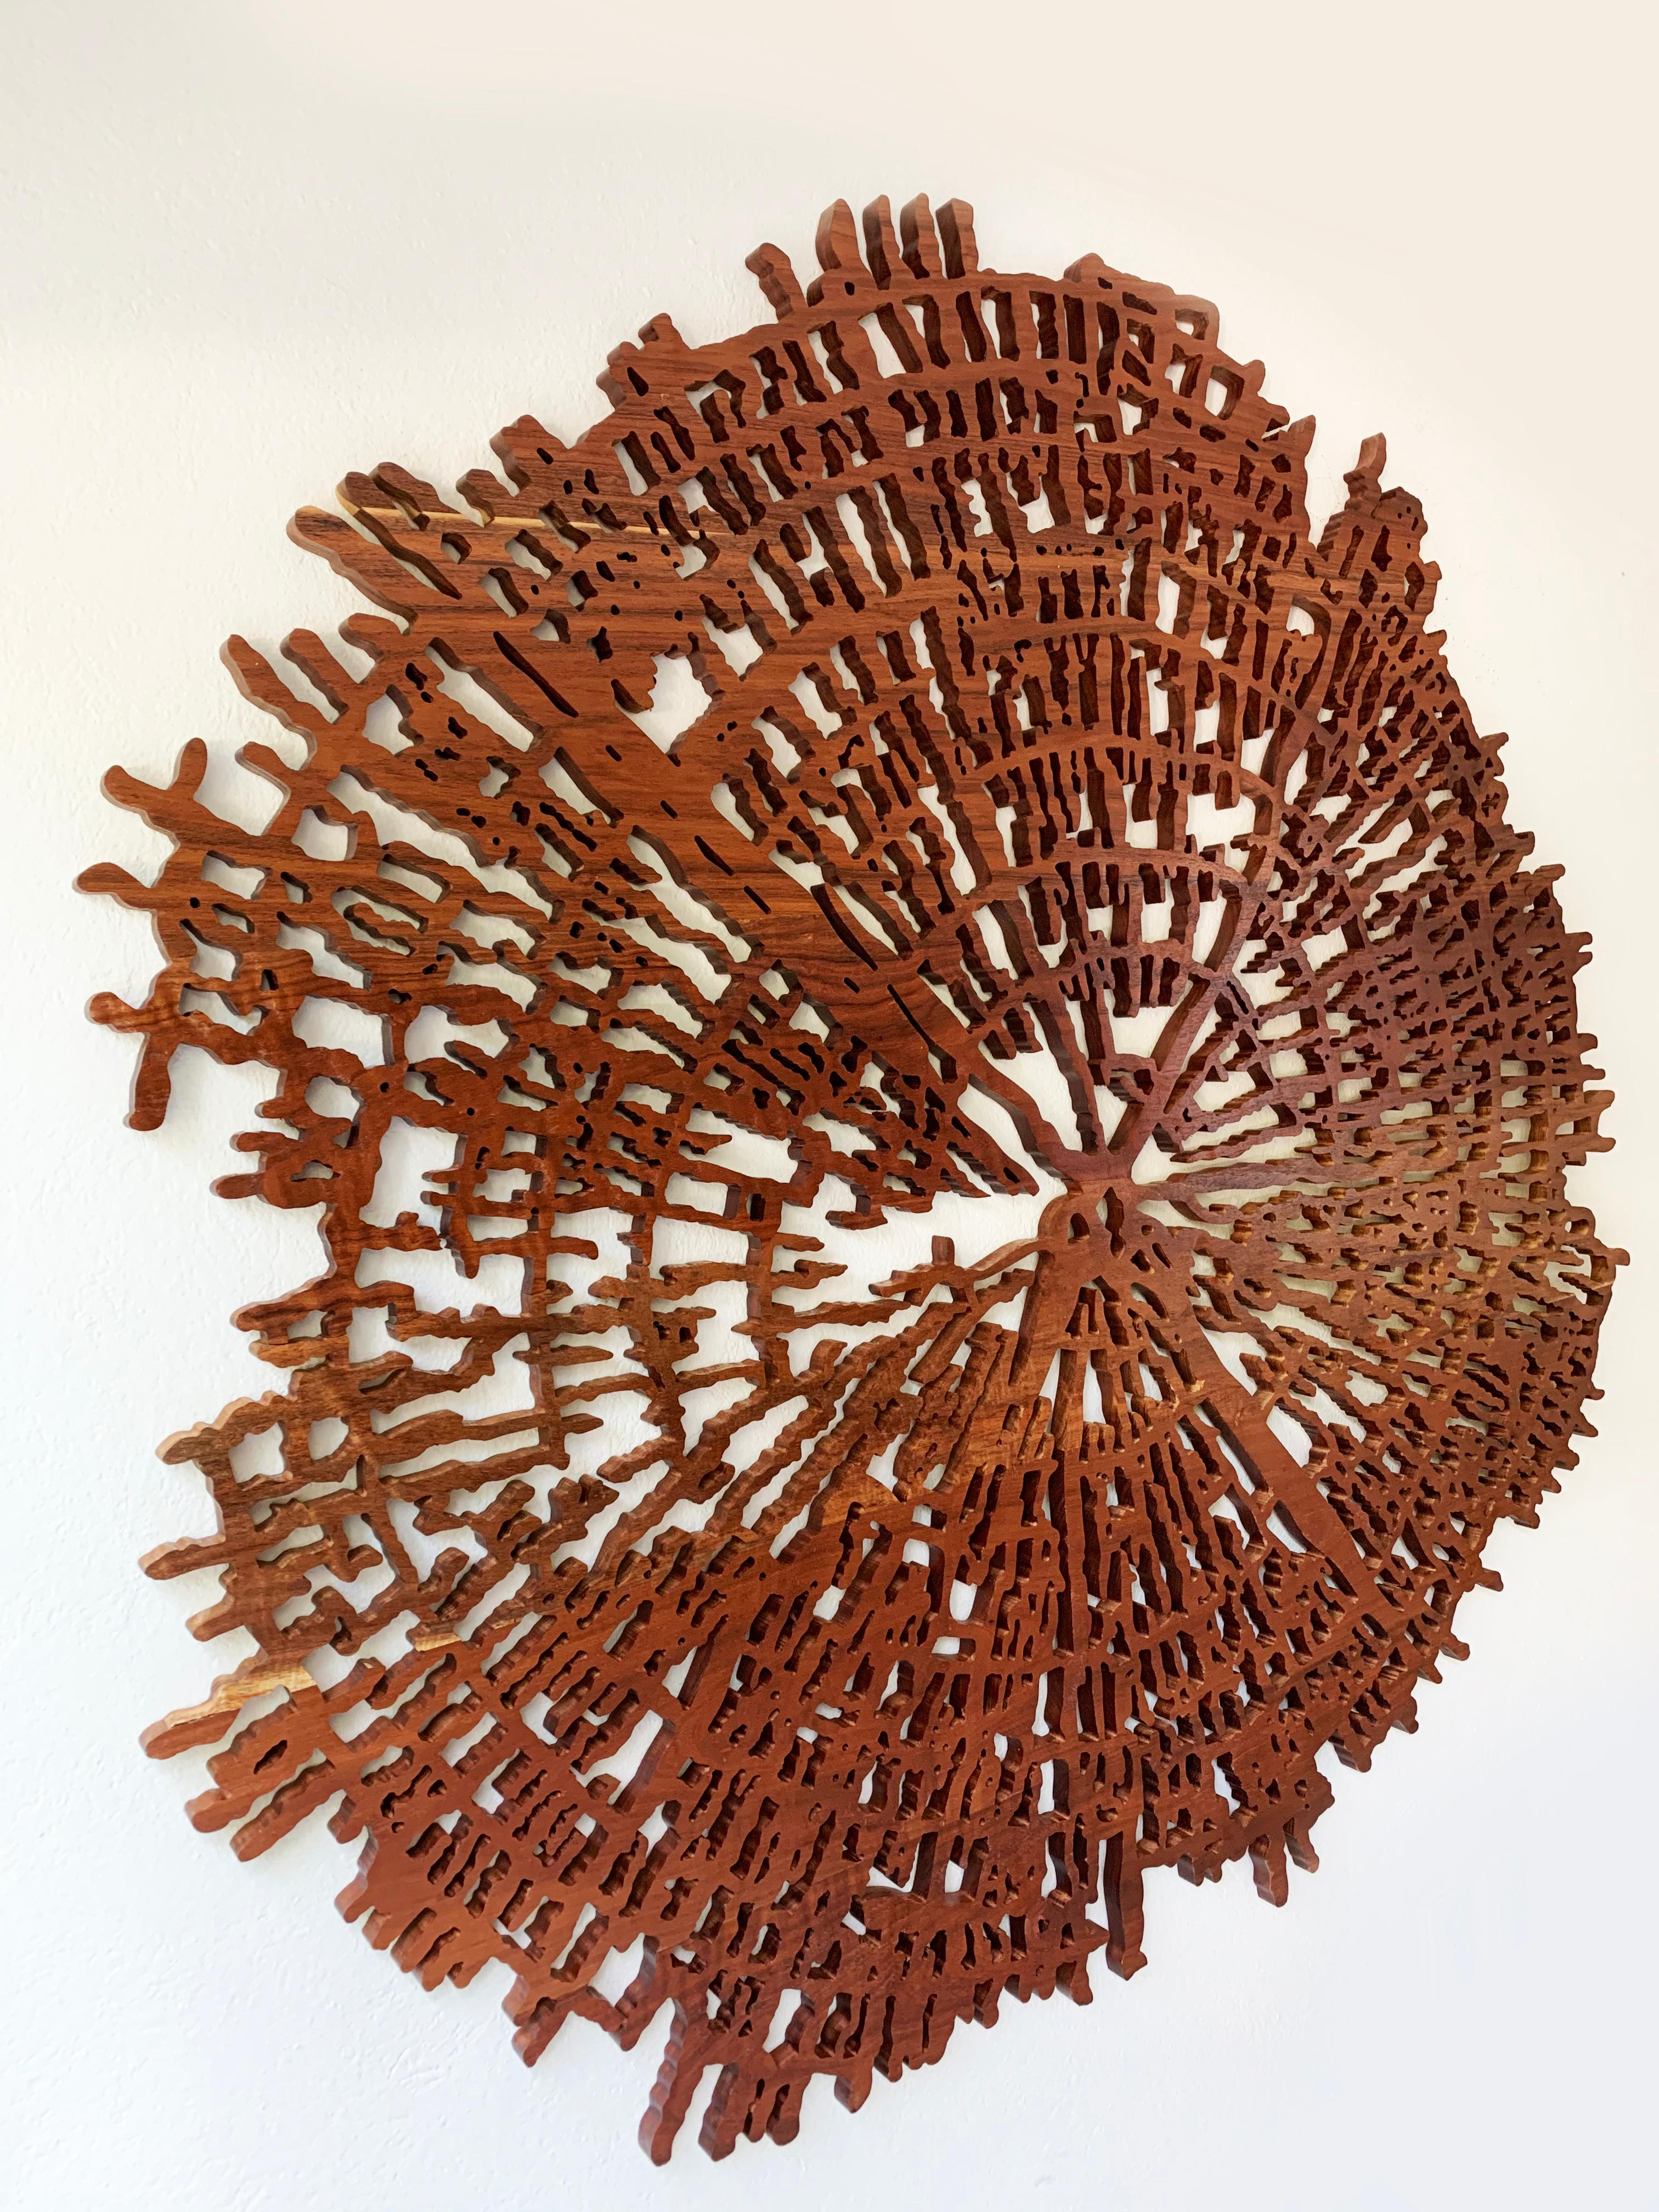 Dendrochronology of Trees in an Abstract Wooden Solid Piece - Brown Abstract Sculpture by Arozarena De La Fuente